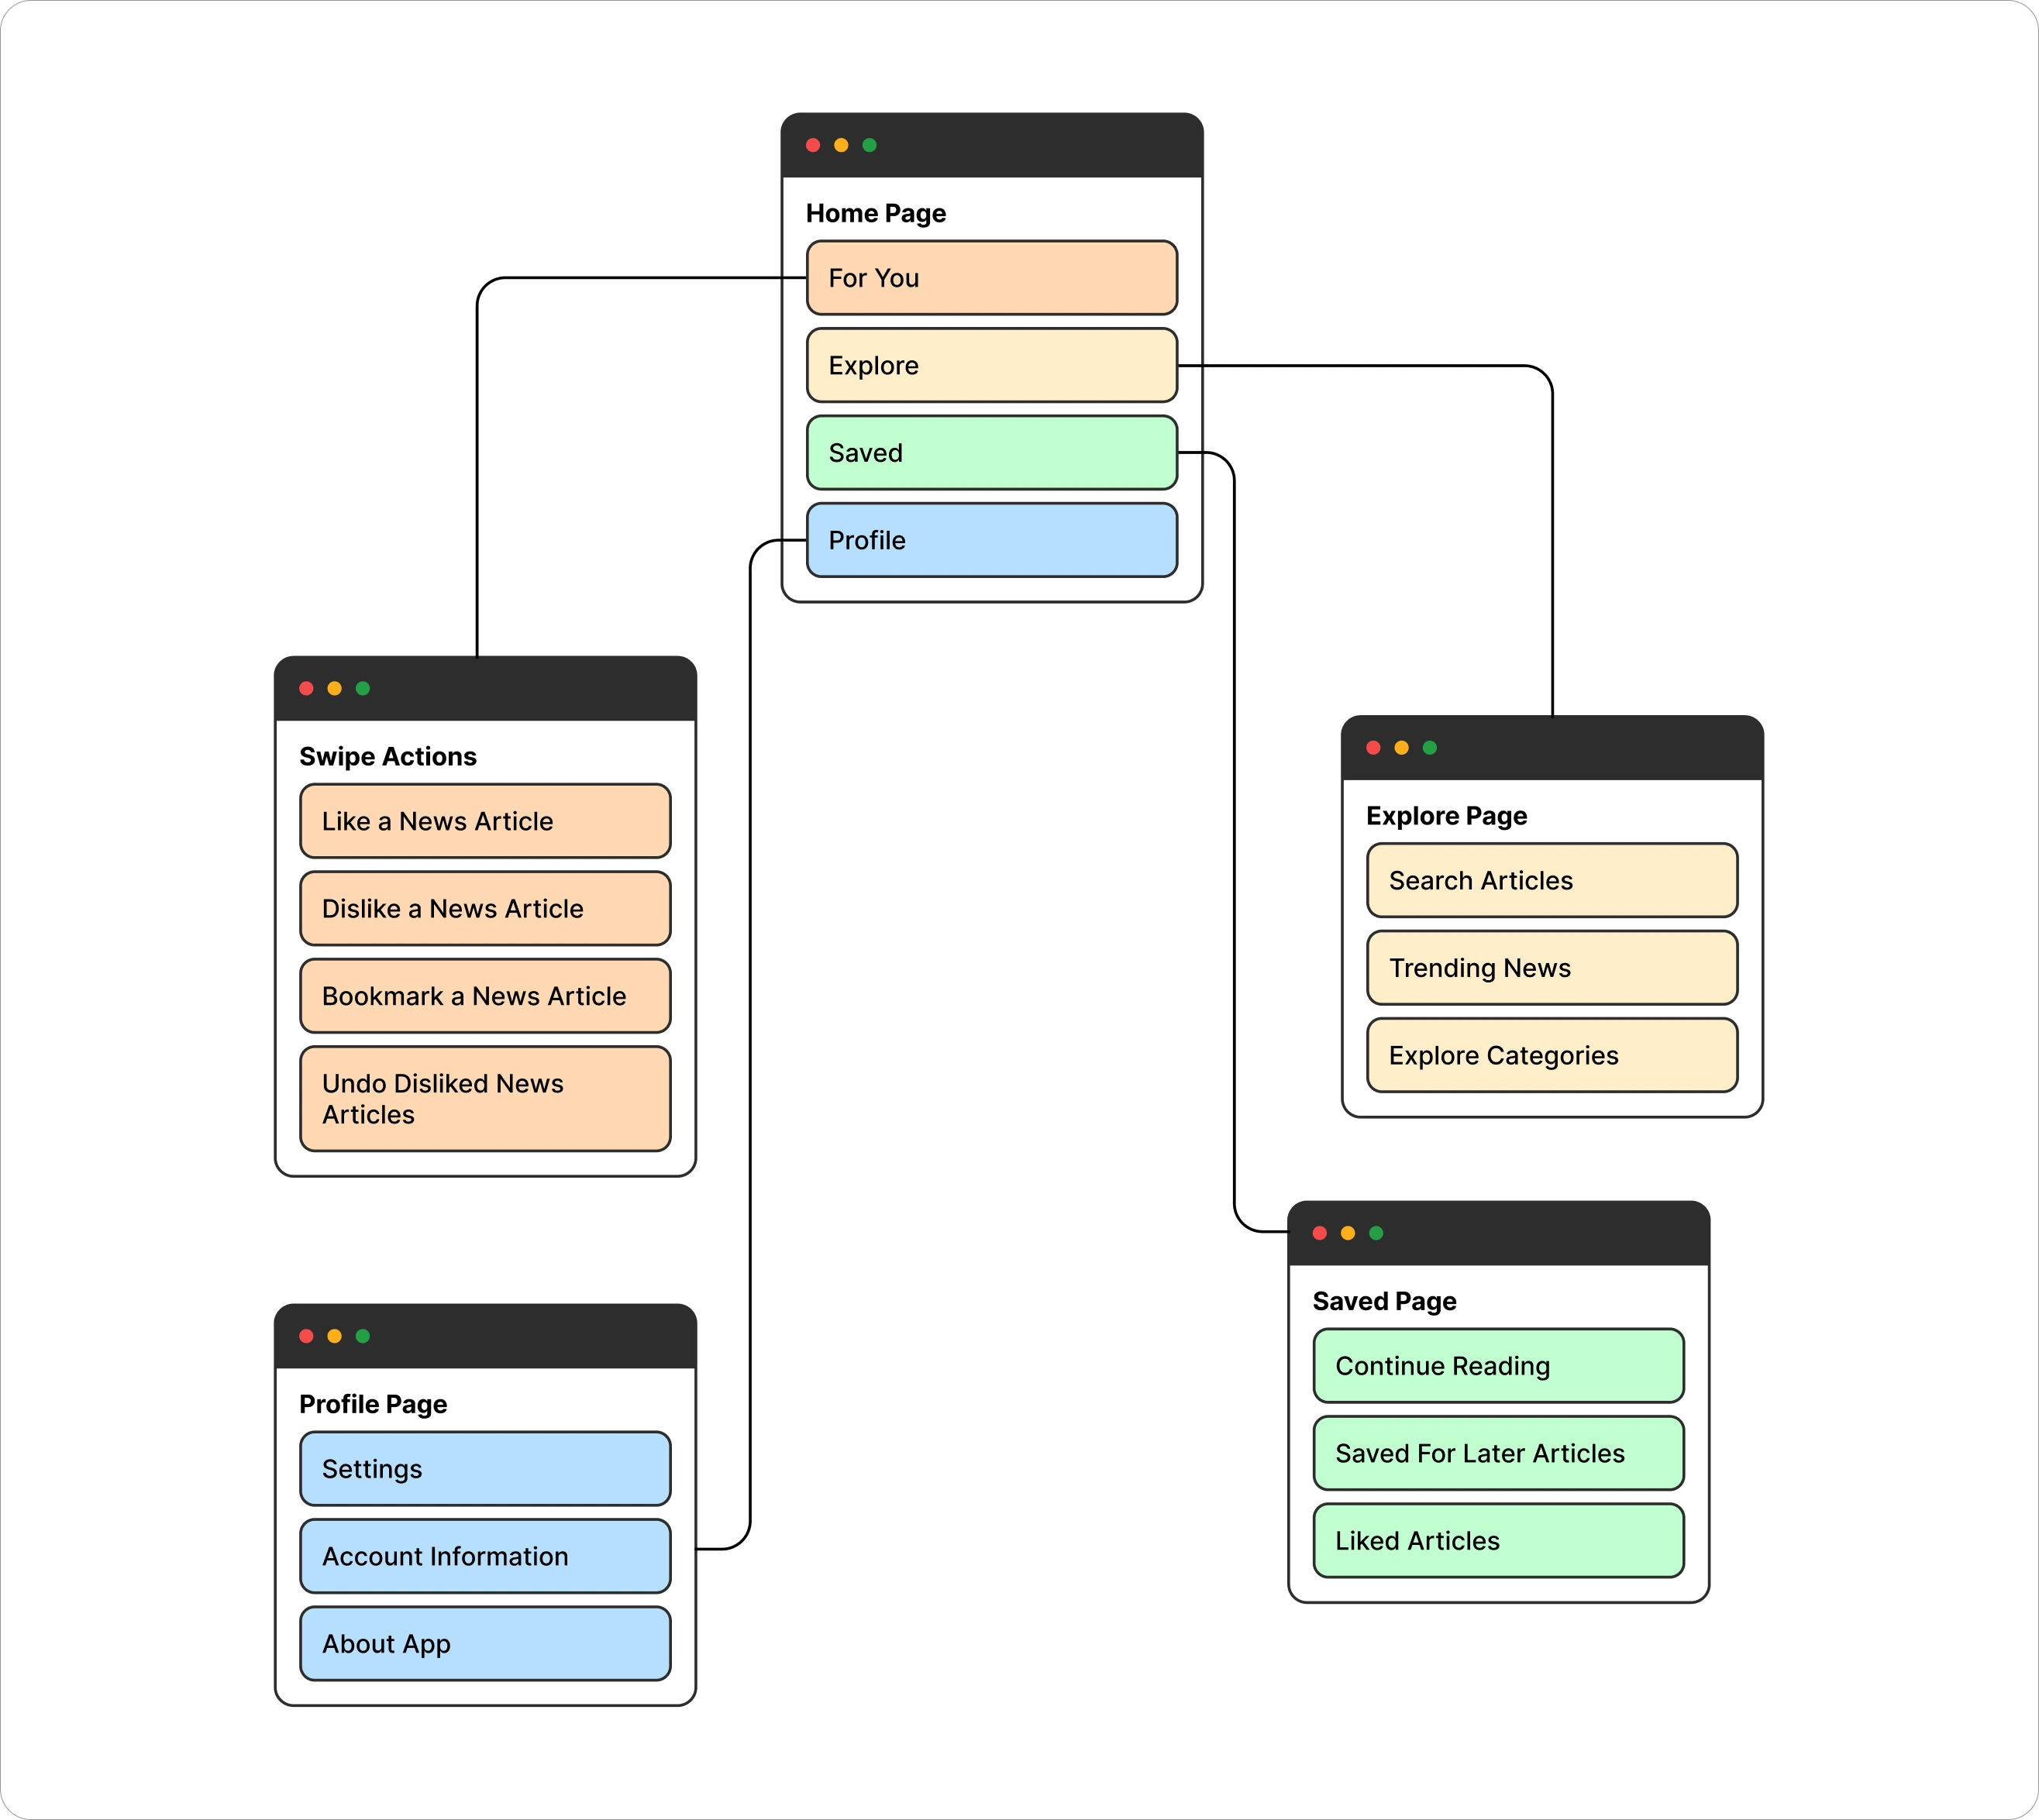 Information Architecture of news app